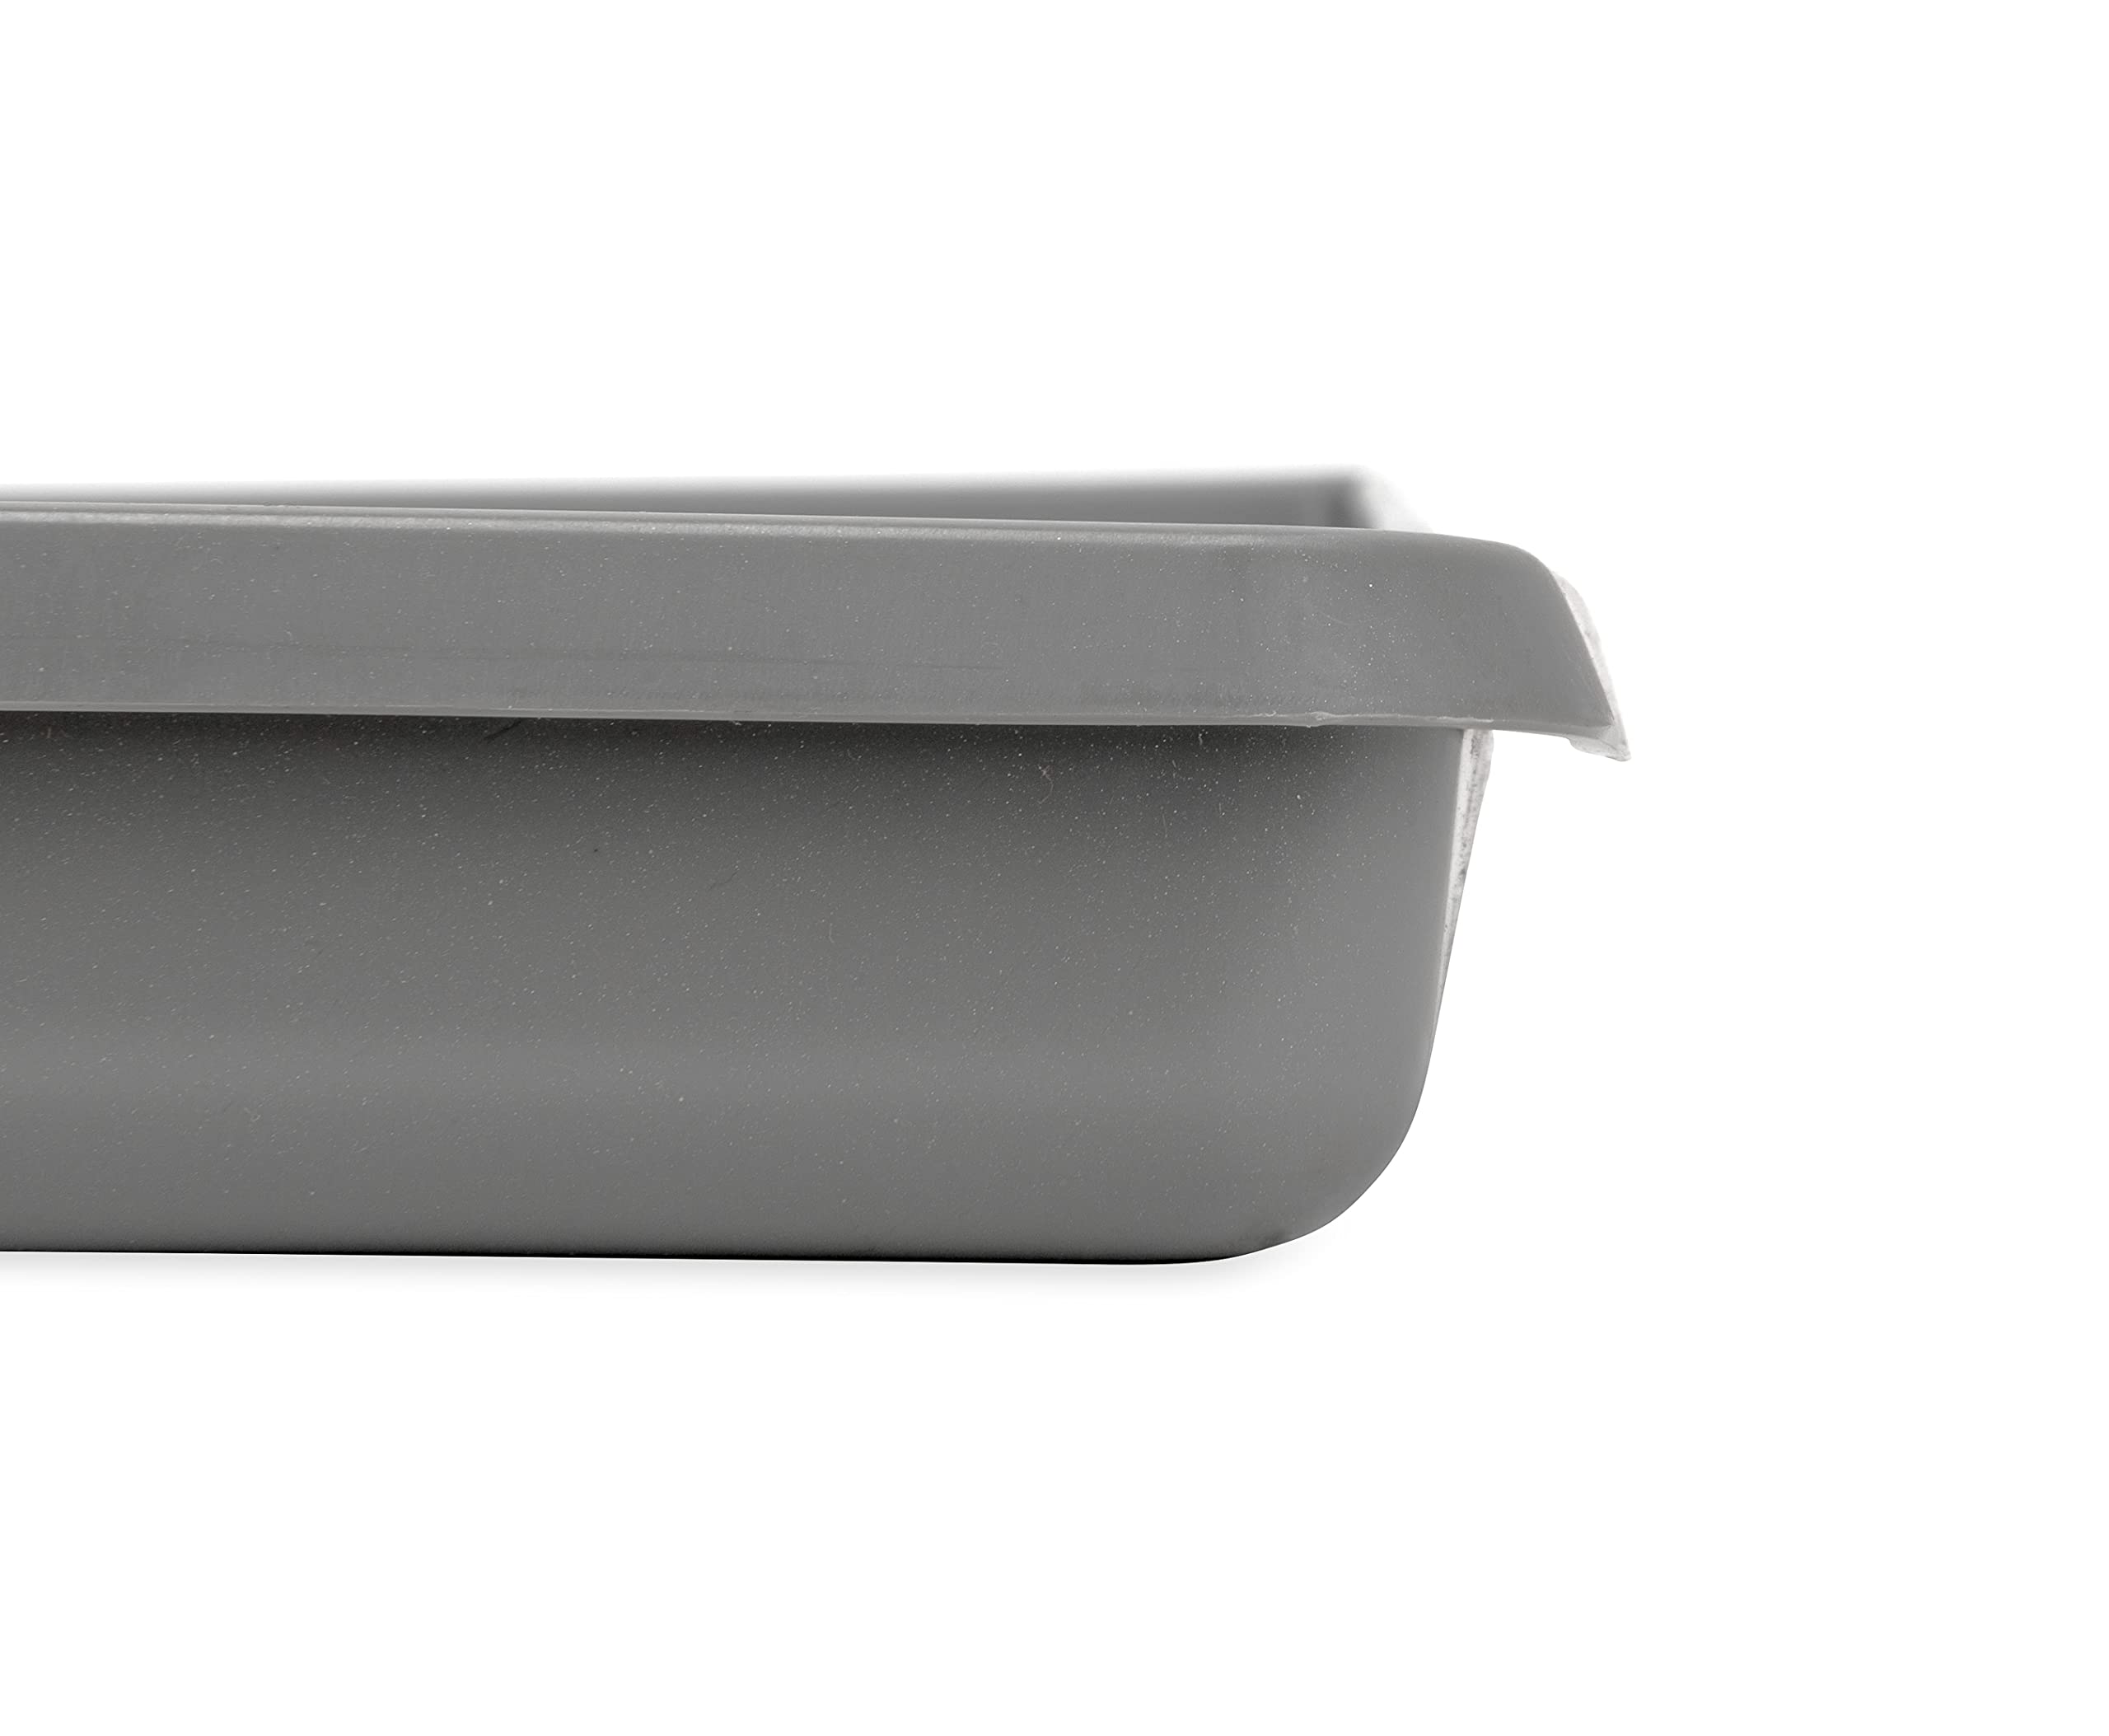 Camco Washing Machine Drain Pan | 31-inches x 35-inches (OD); 29-inches x 33-inches (ID) | Pewter (20788)